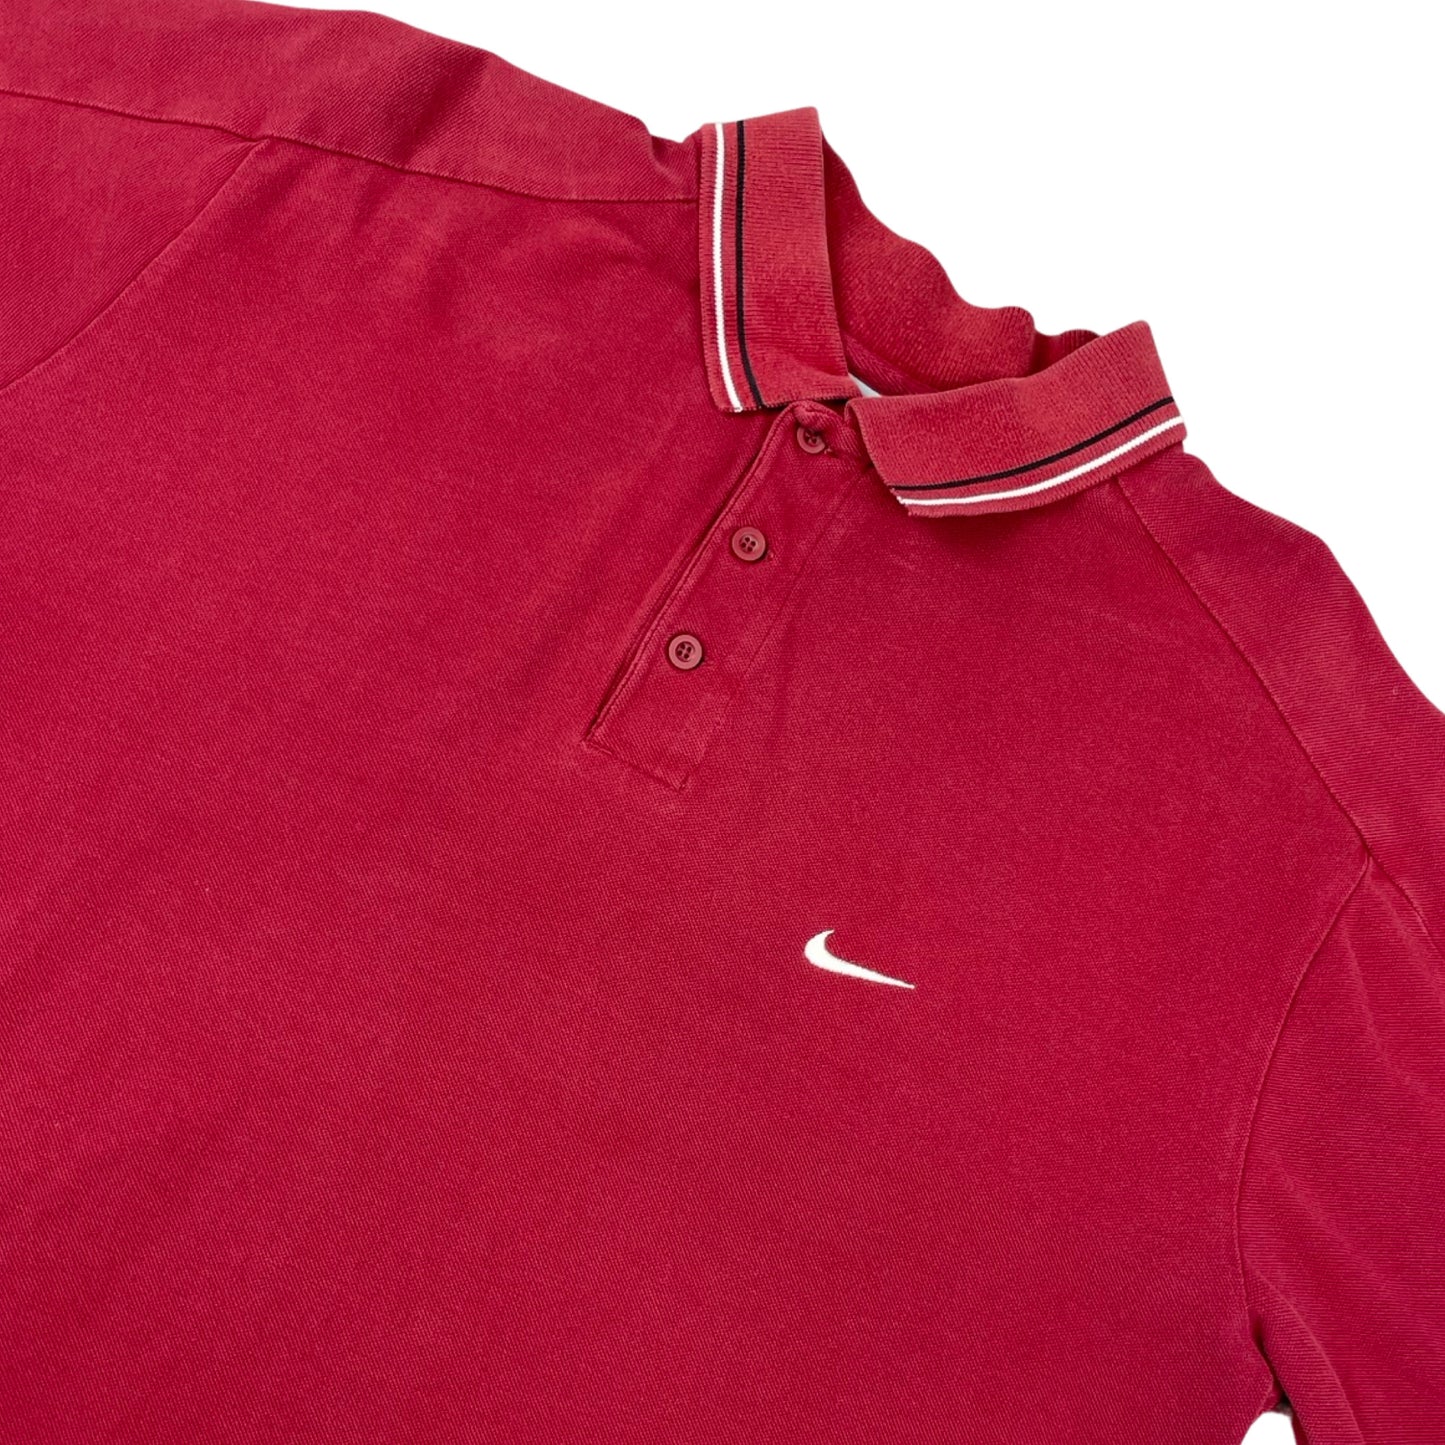 Vintage 00s Nike Red Polo Shirt L